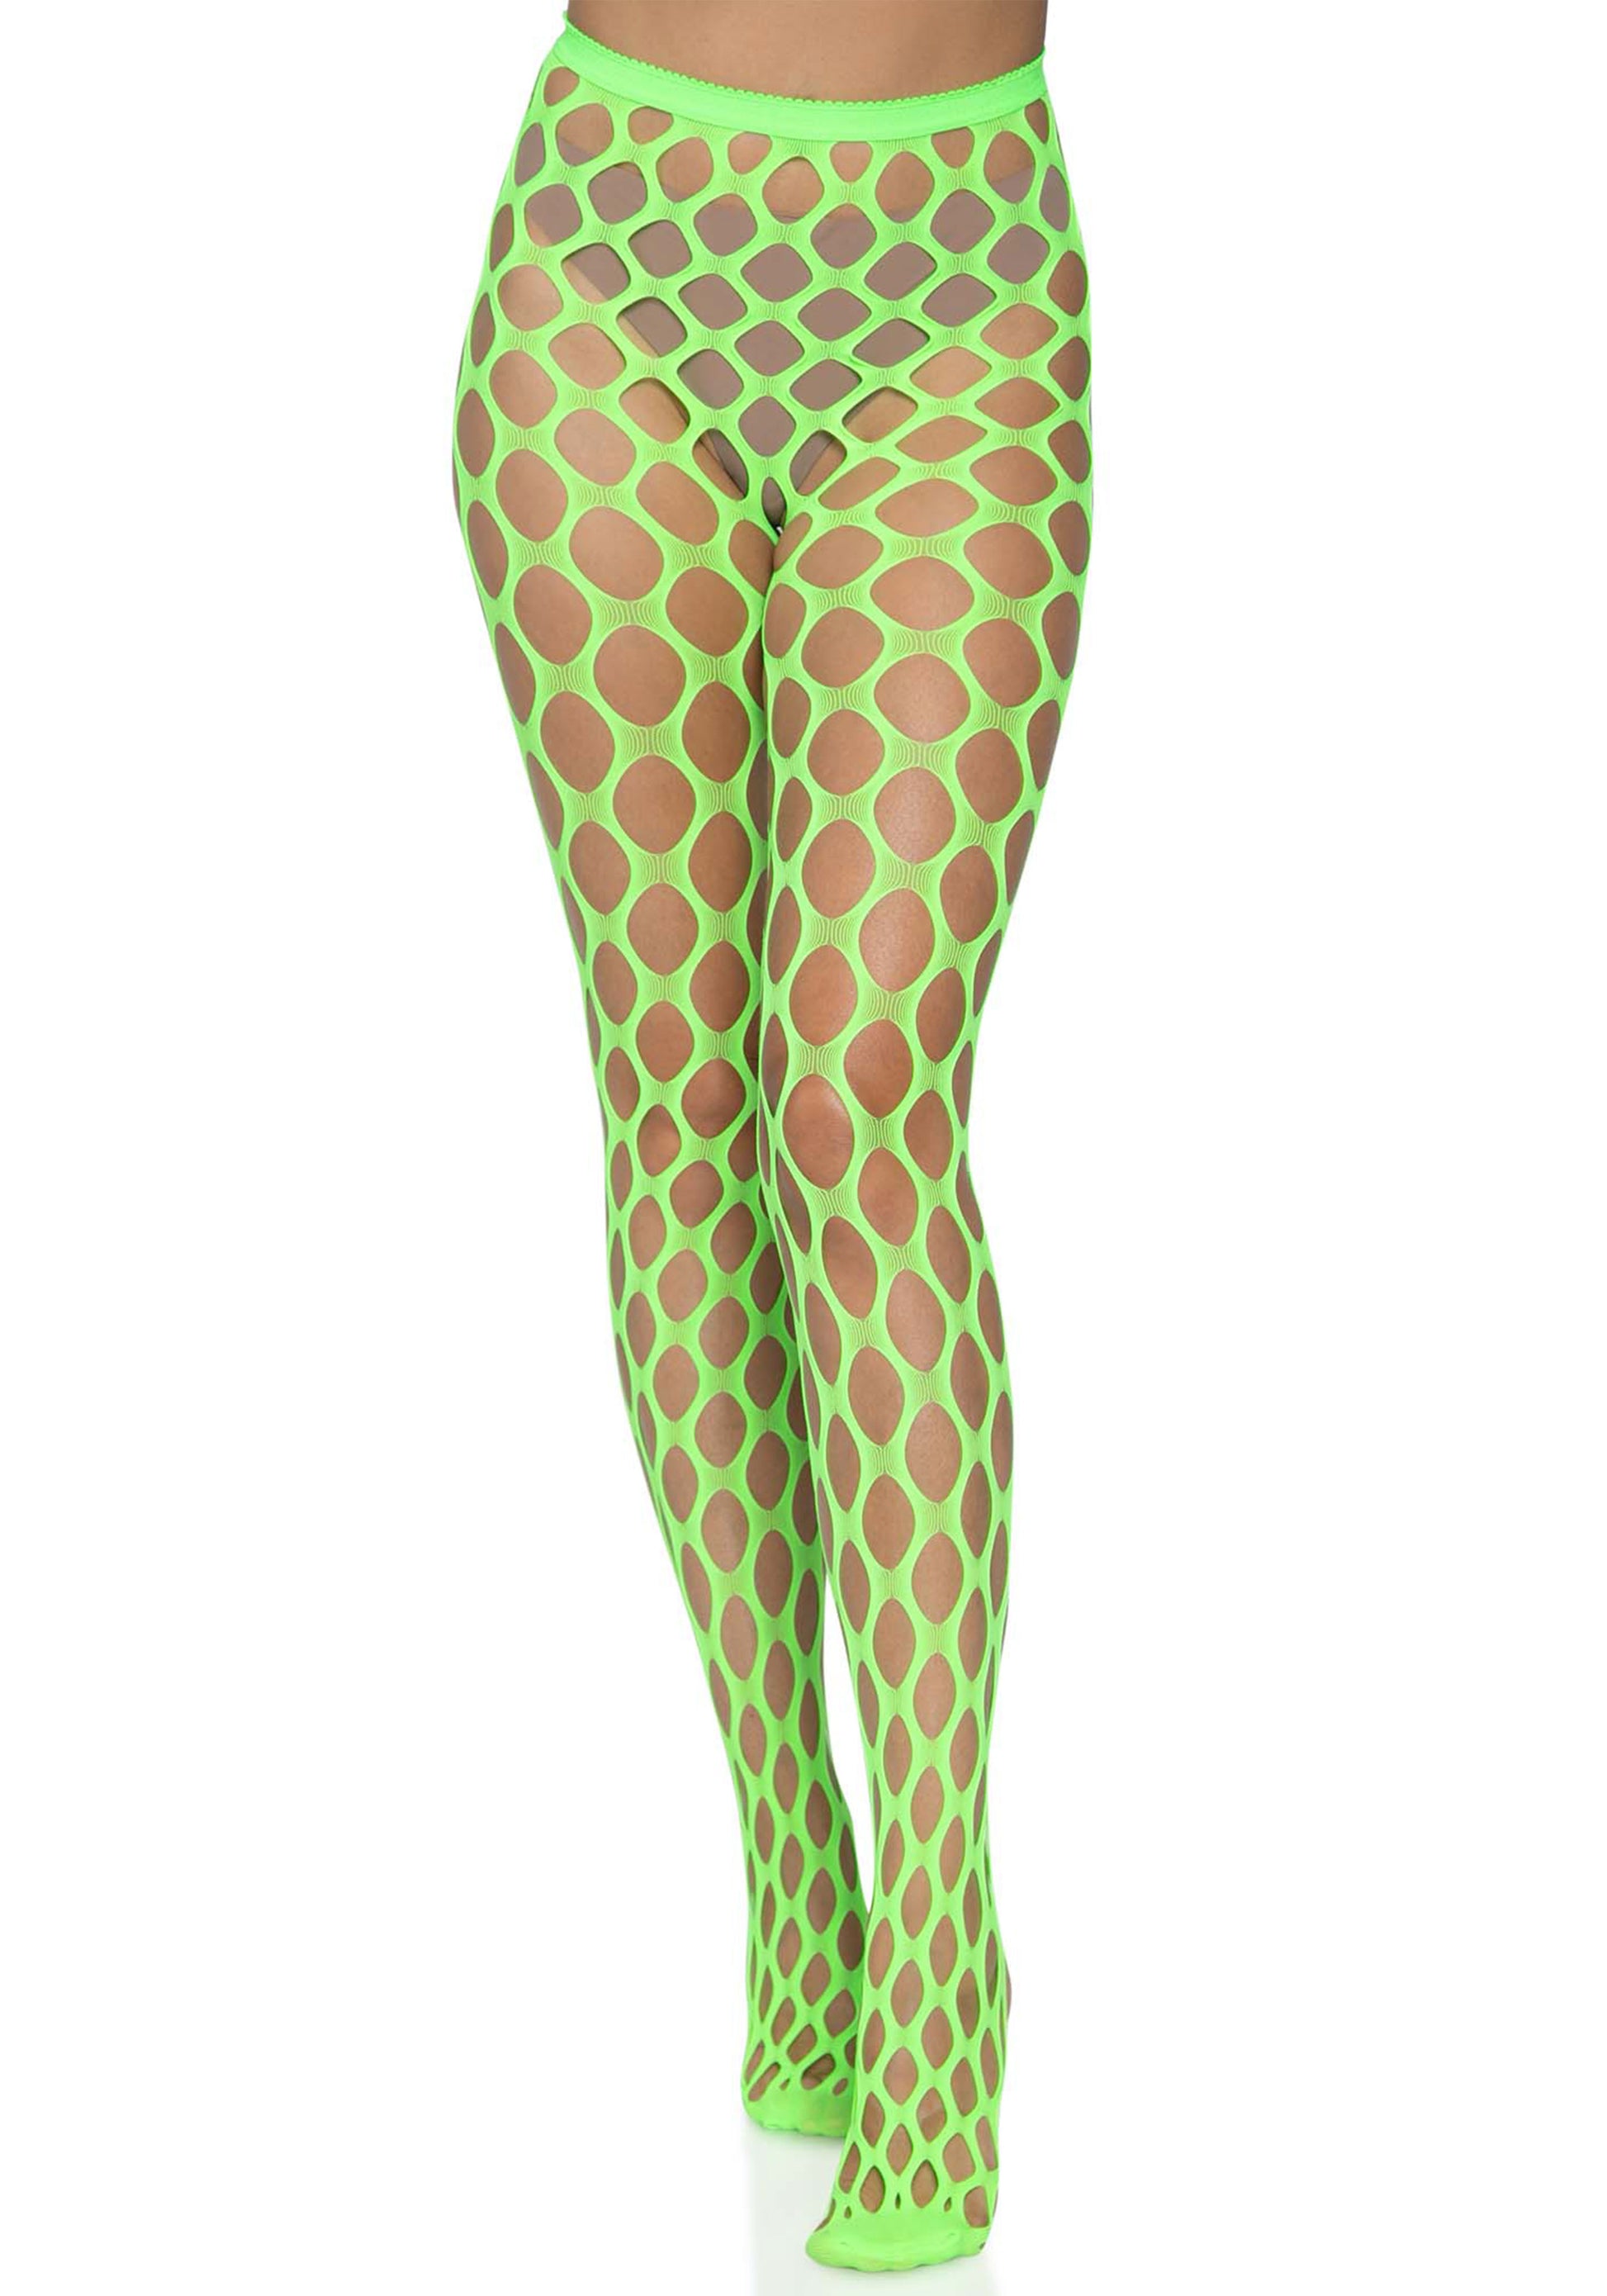 Leg Avenue 9331 Pothole Fishnets - Bright neon green wide thick circular fishnet tights with micro mesh toe and seamless body. Perfect for festivals, clubs and raves.